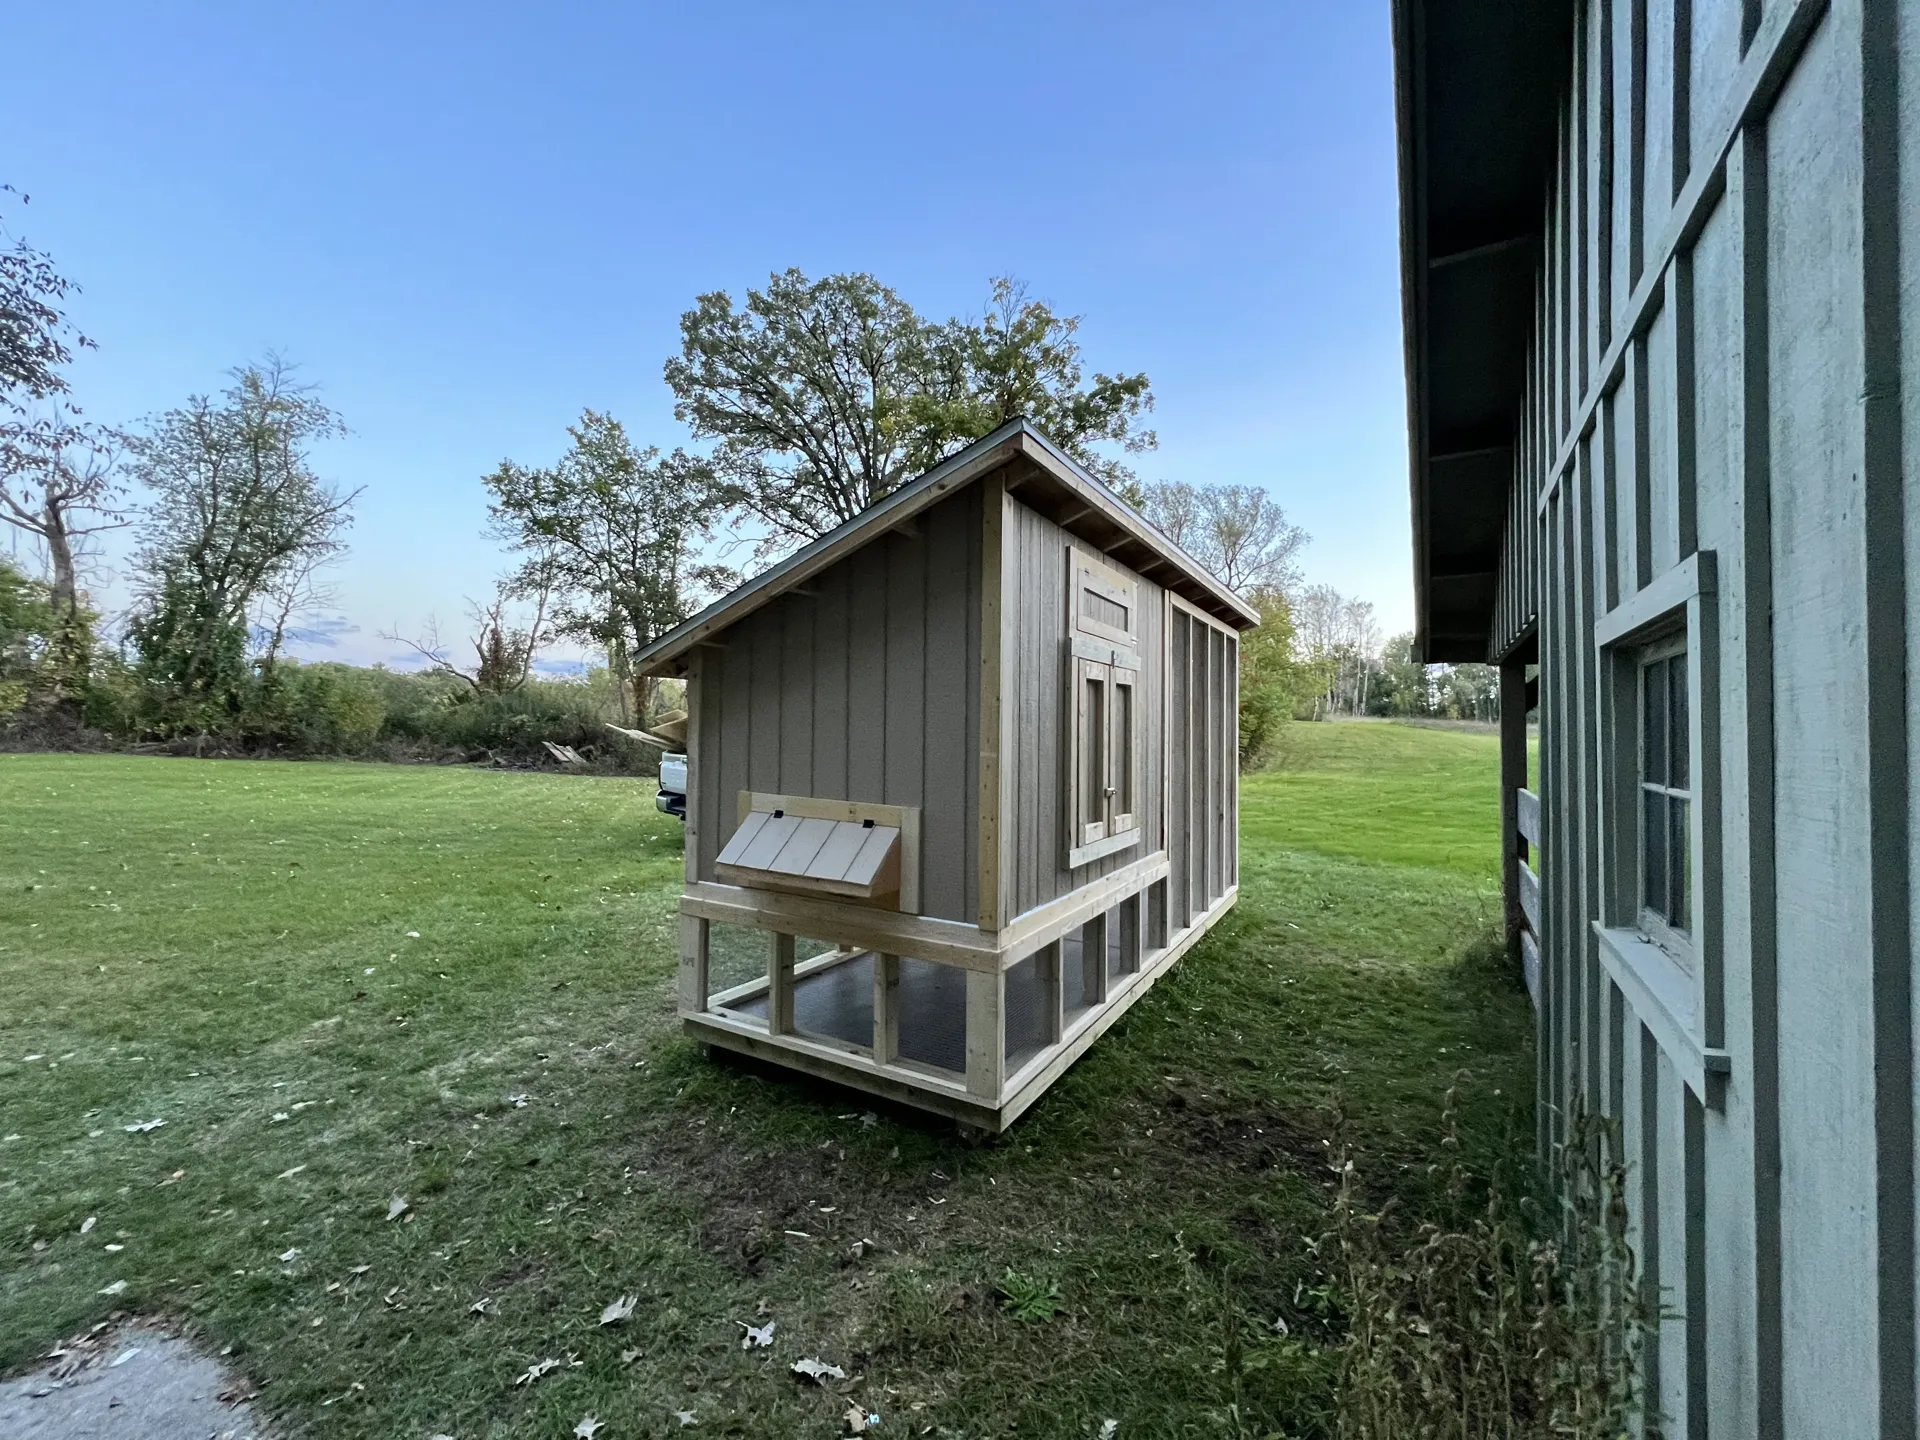 Rear of completed coop with egg box